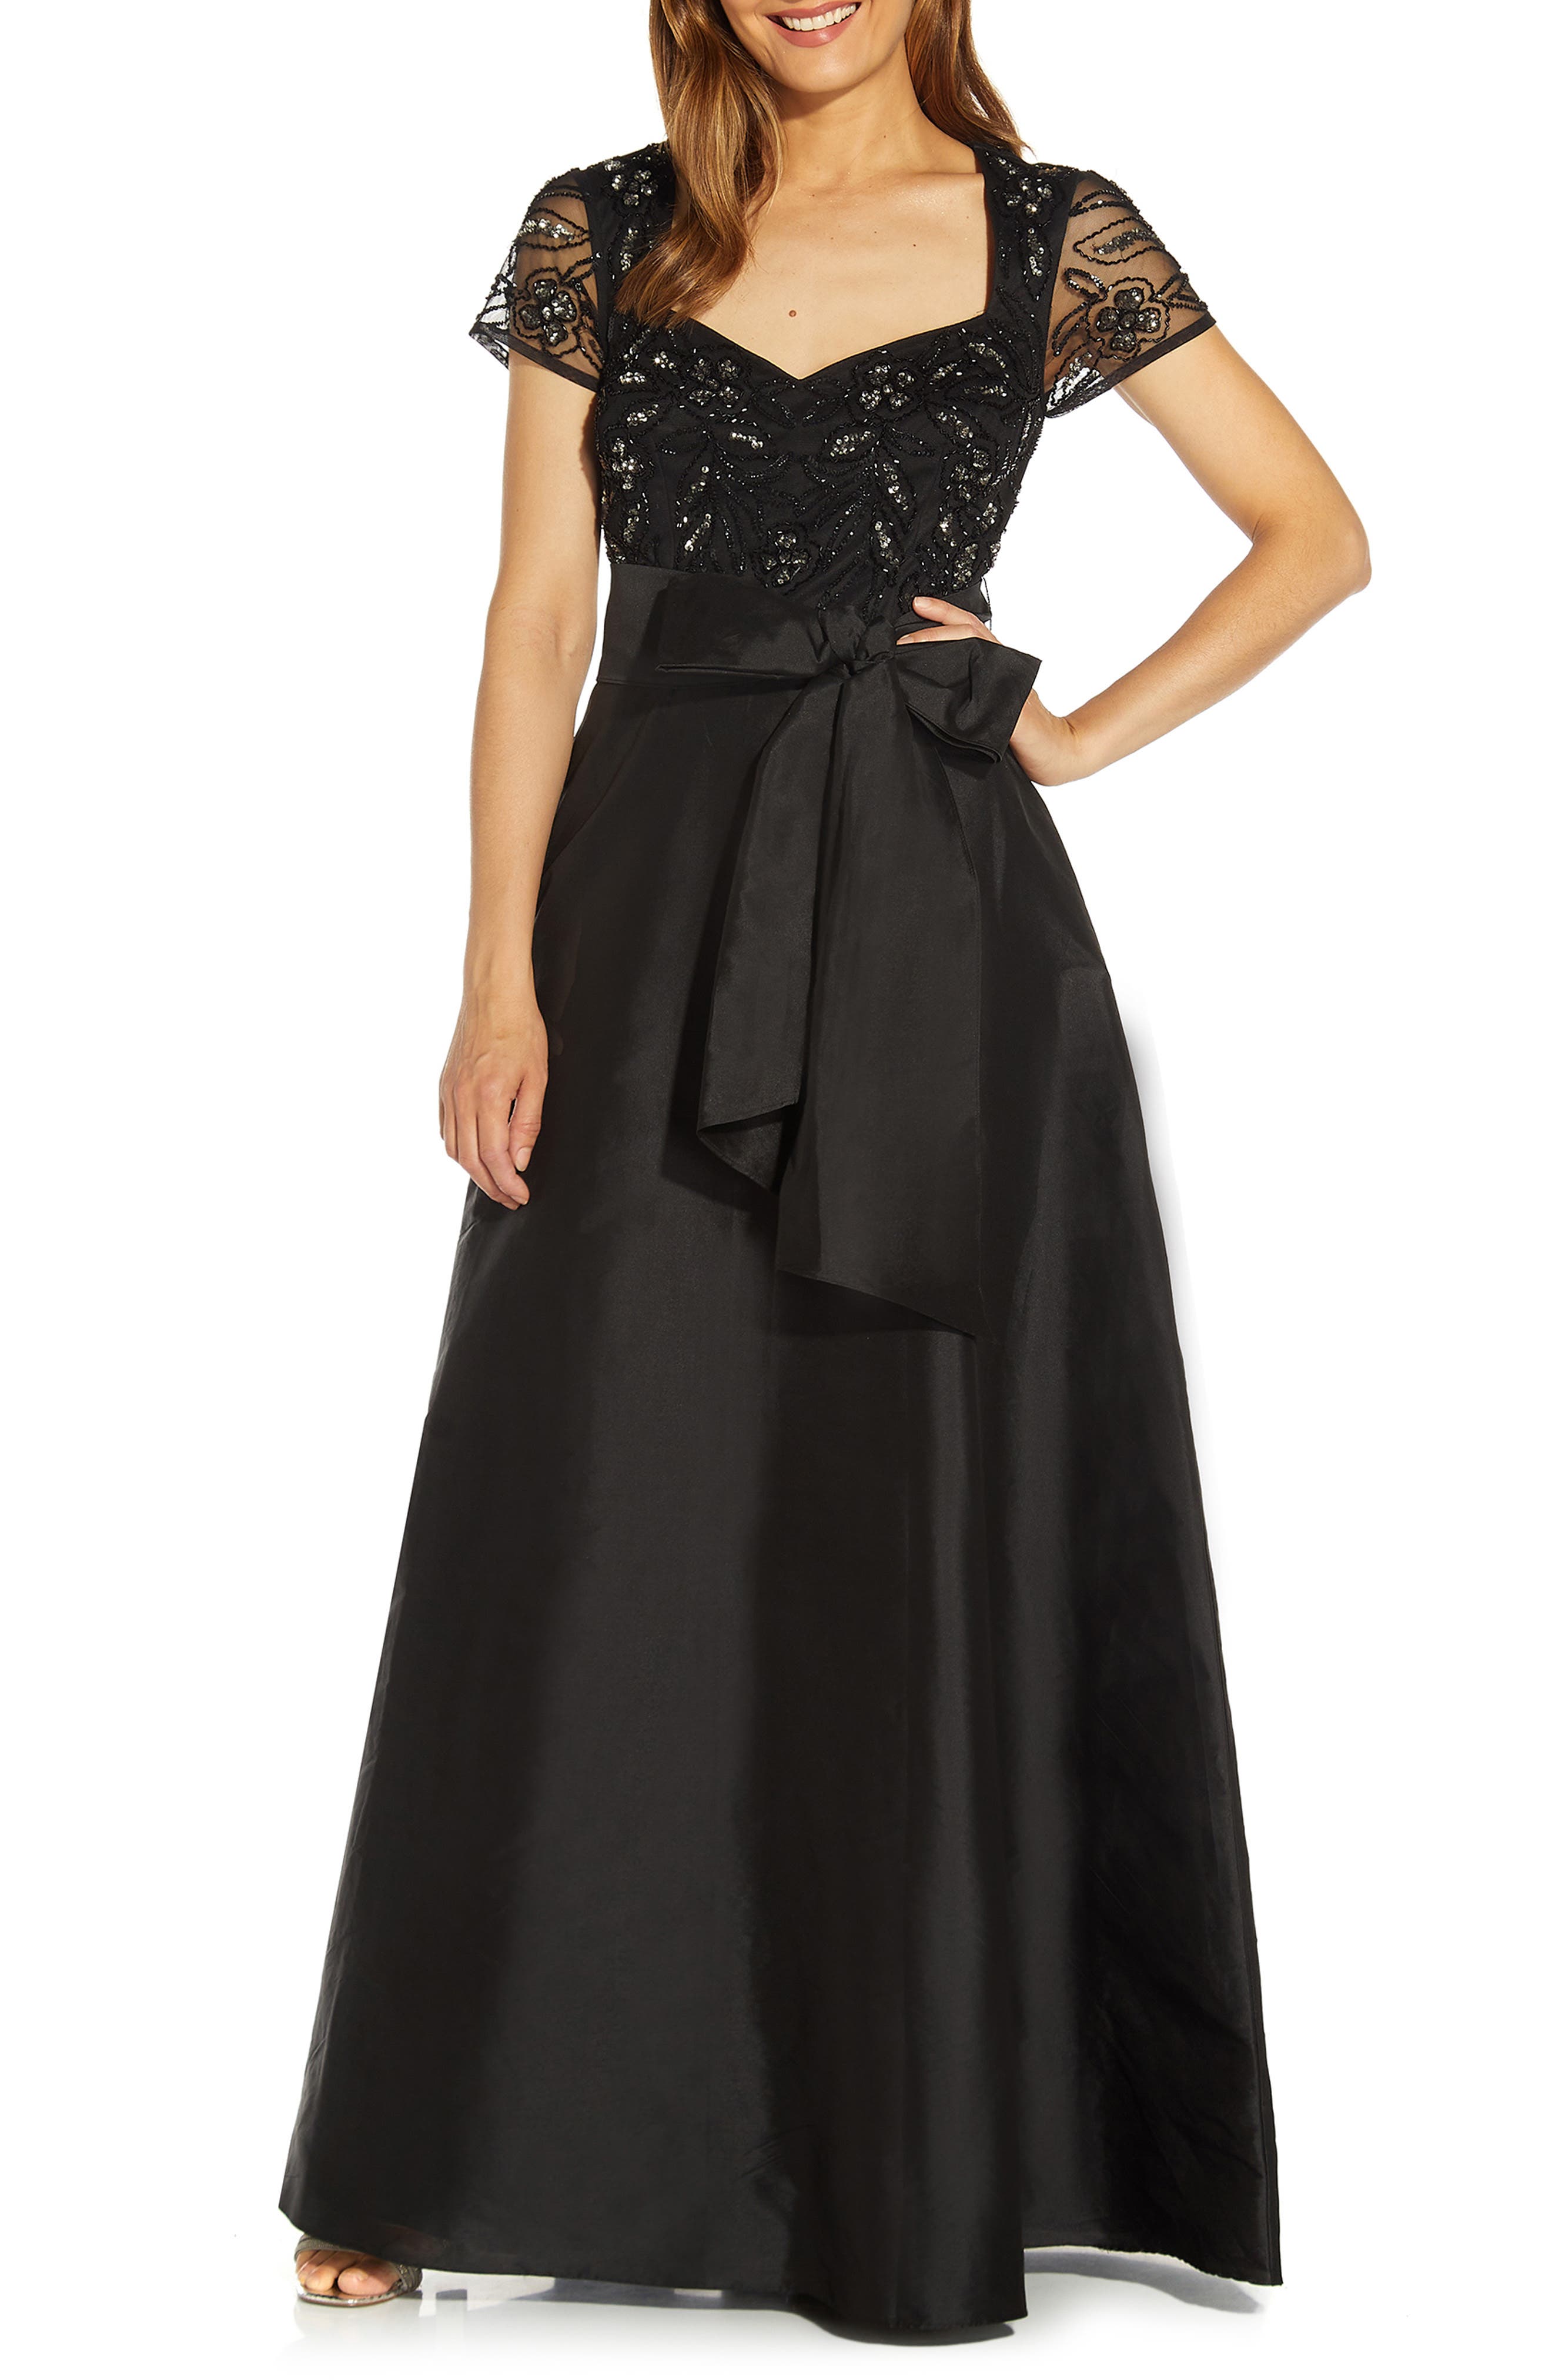 1940s Style Prom Dresses, Formal Dresses, Evening Gowns